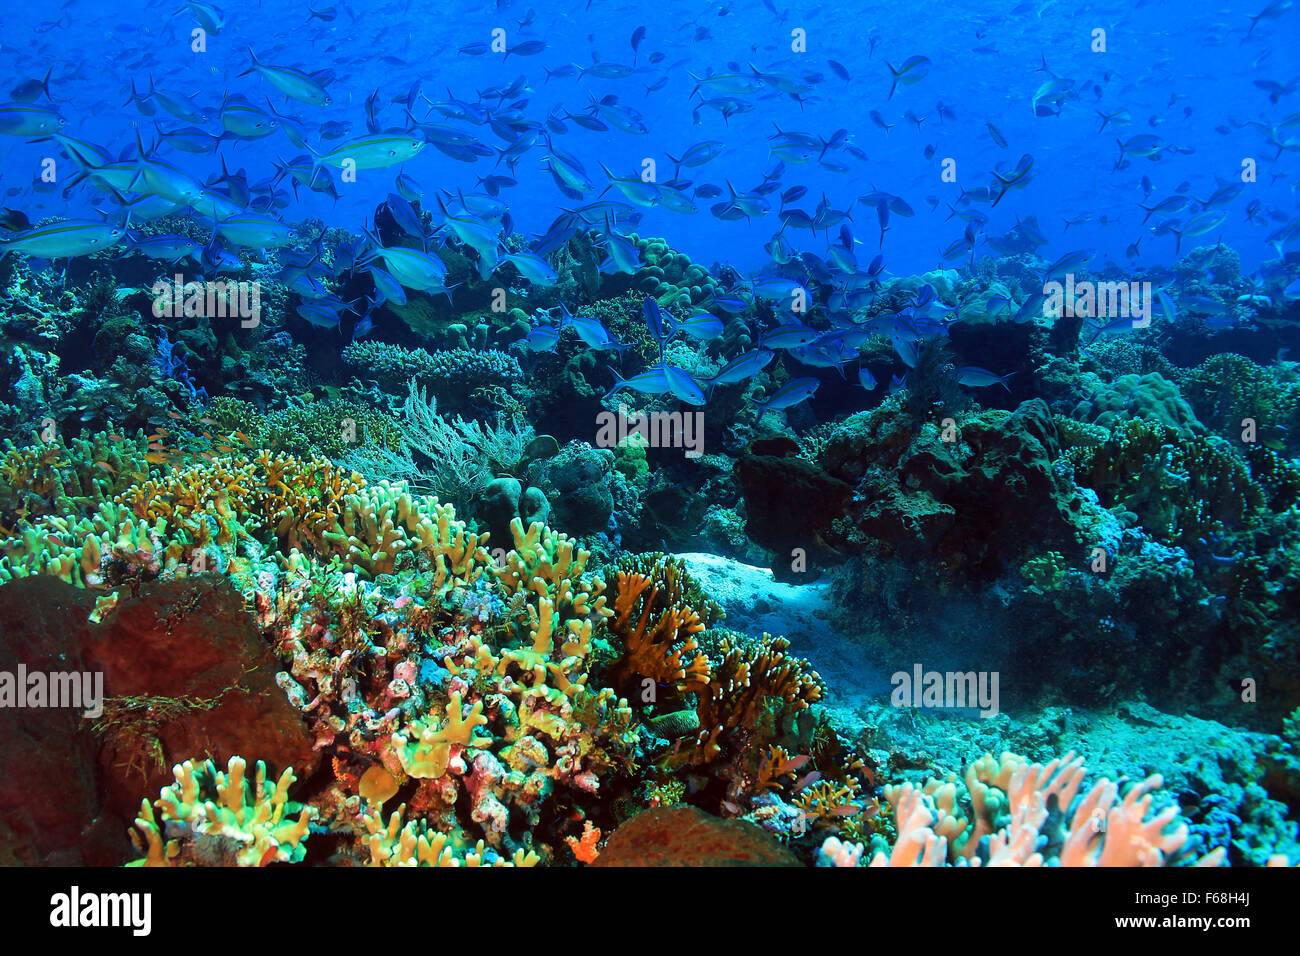 School of Blue and Gold Fusiliers (Caesio Caerulaurea) over a Coral Reef. Komodo, Indonesia Stock Photo